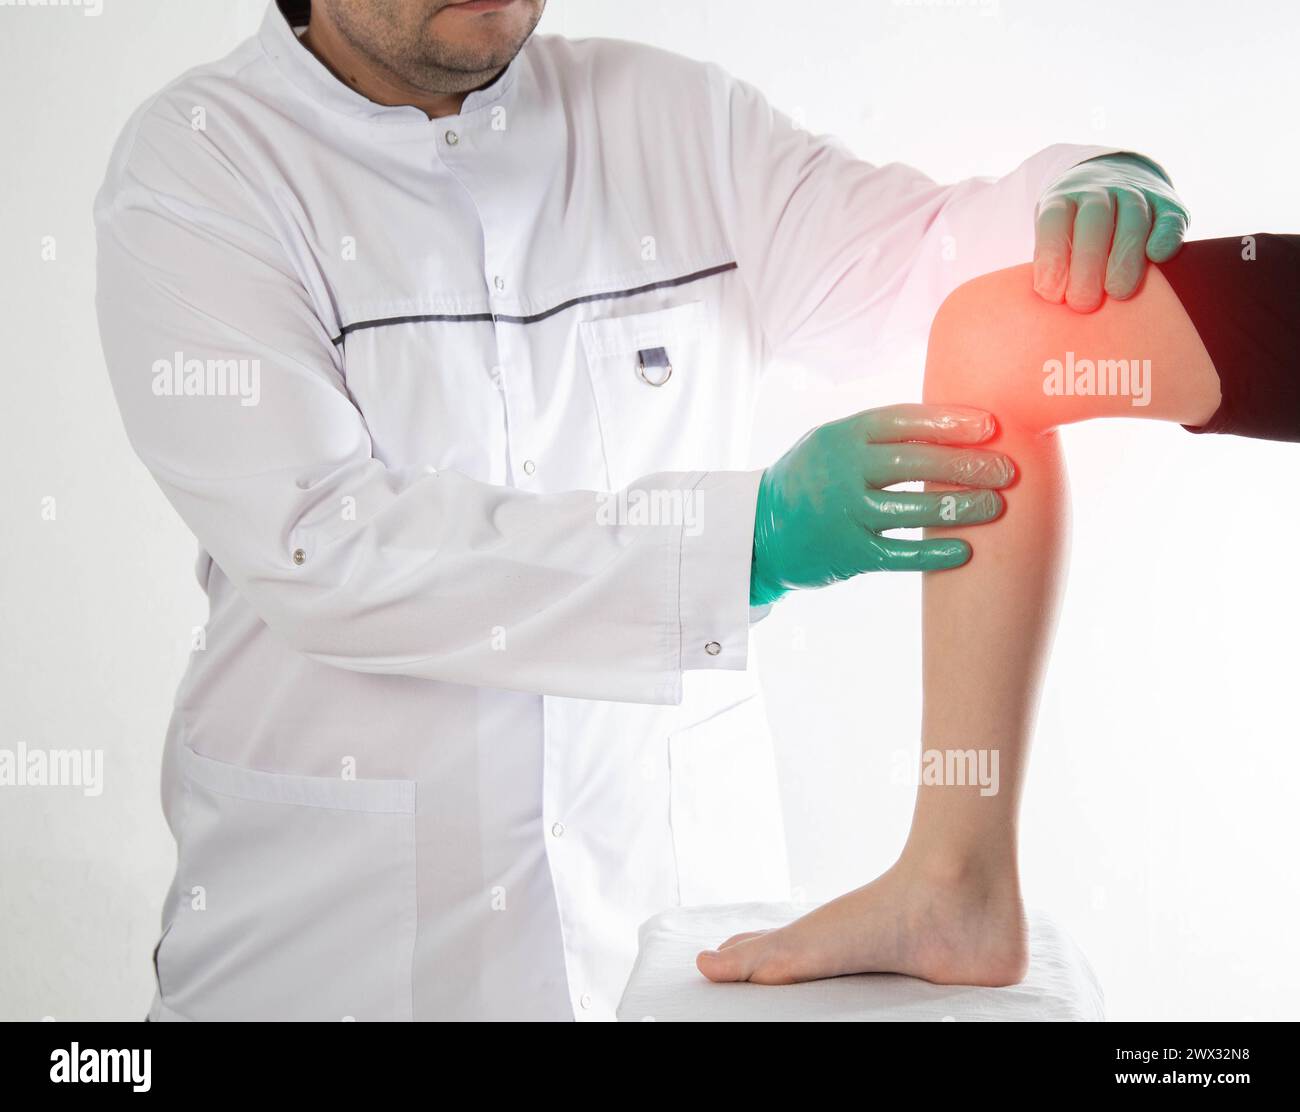 A doctor traumatologist orthopedist examines the knee joint of a child who has knee pain. Concept of growing pains in children. Dislocation and injury Stock Photo